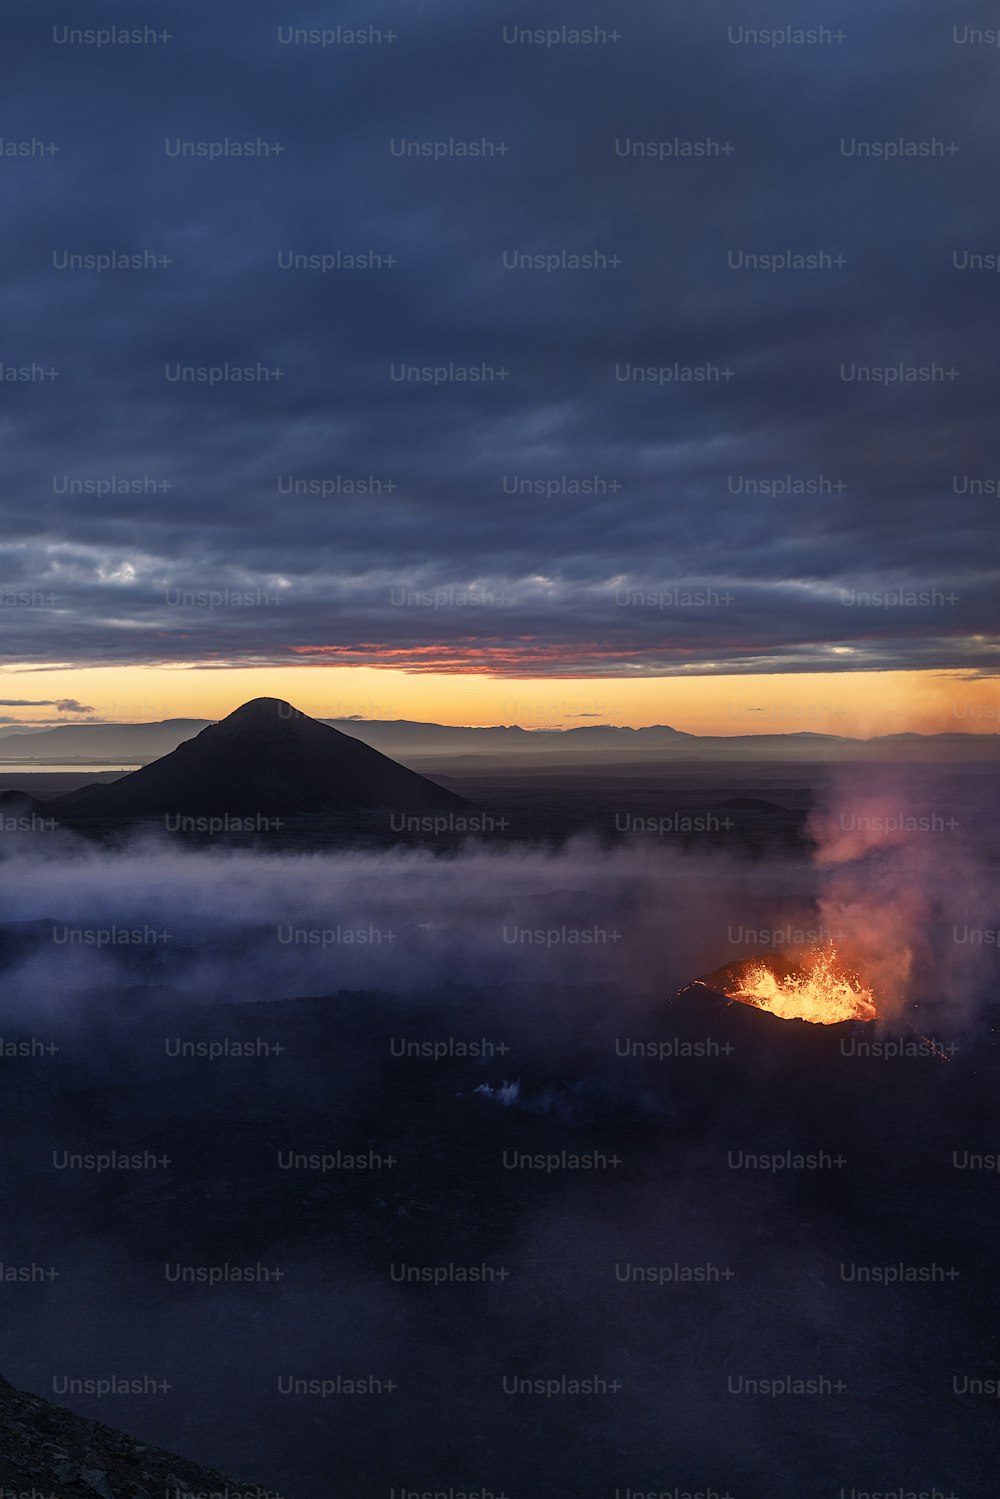 a volcano spewing out lava in the distance